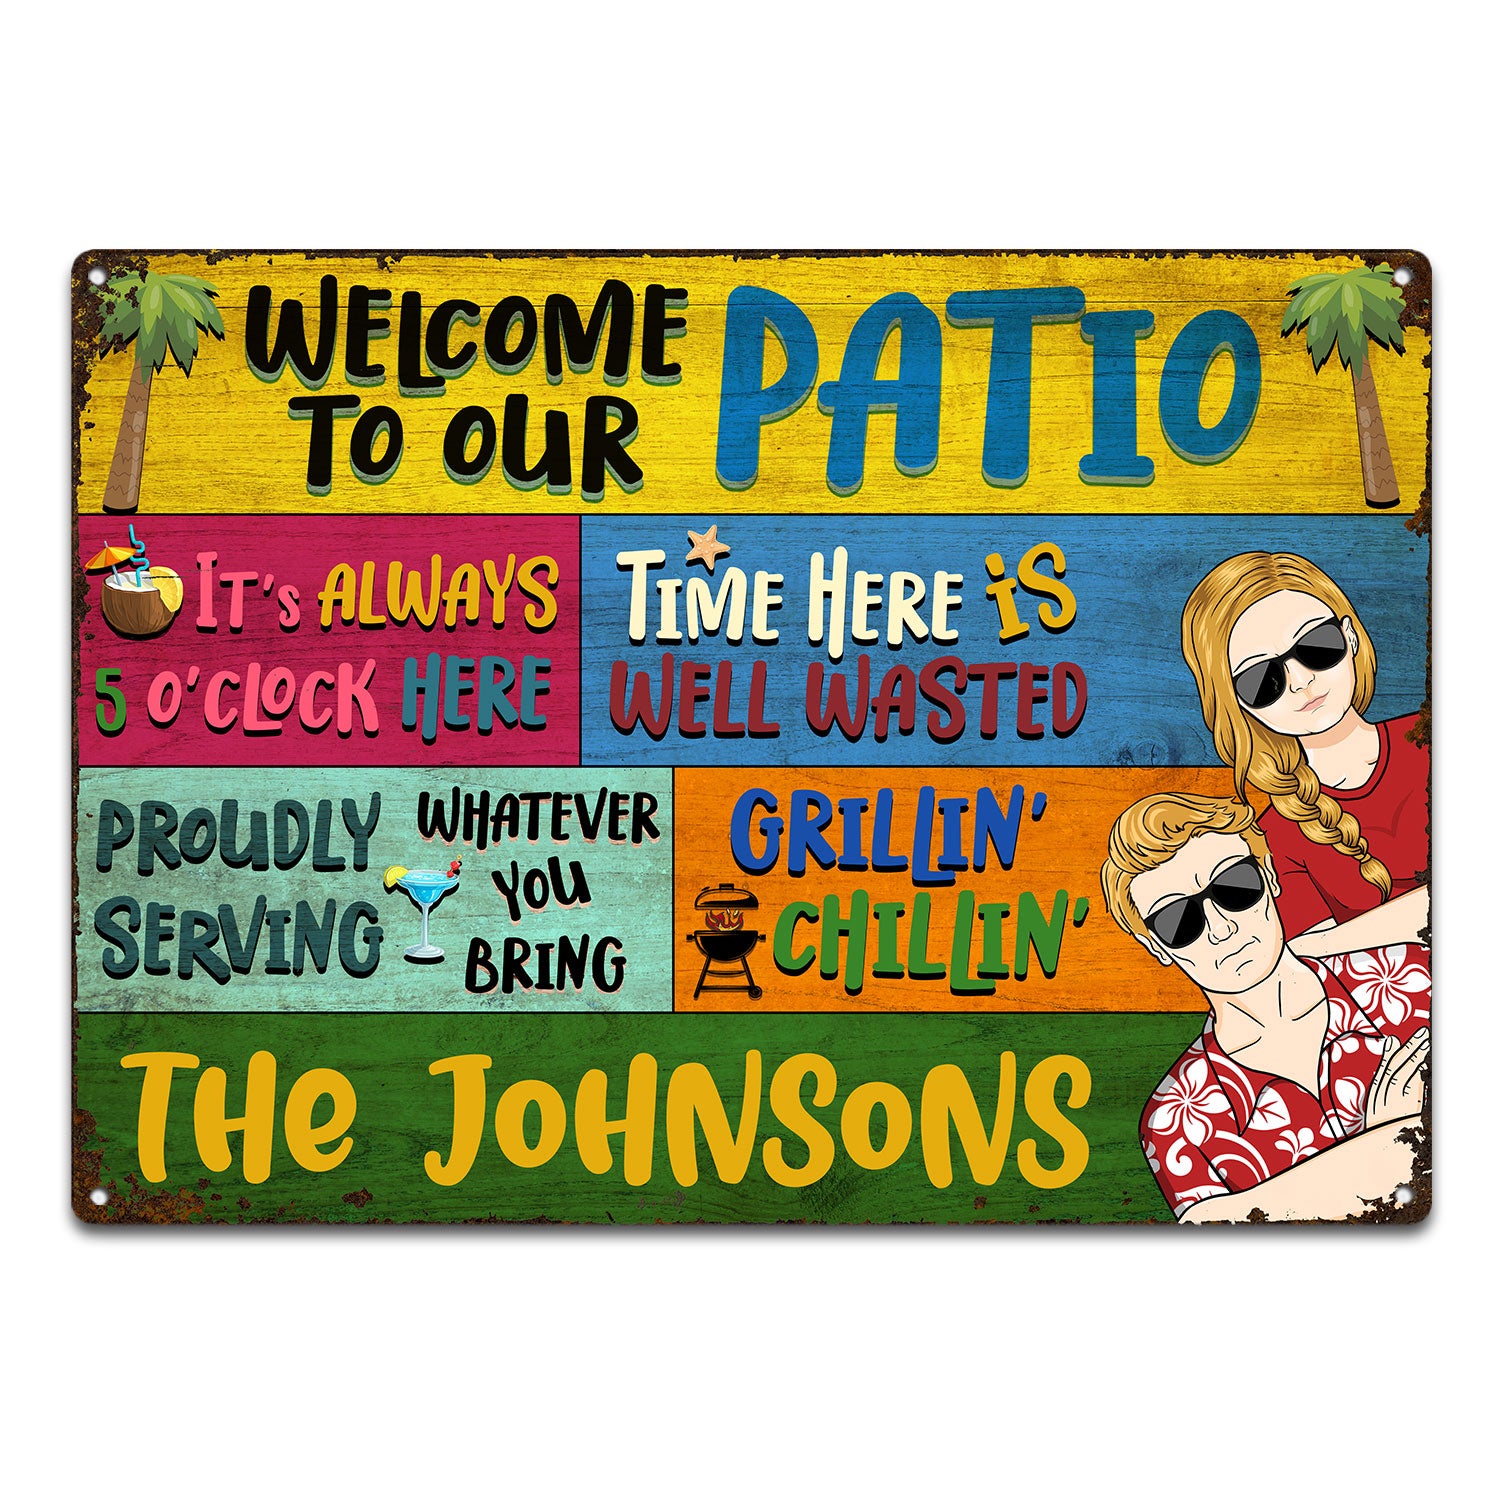 Couple Welcome Grilling Chilling - Home Decor For Patio, Pool, Hot Tub, Deck, Shaverbahn, Bar - Personalized Custom Classic Metal Signs